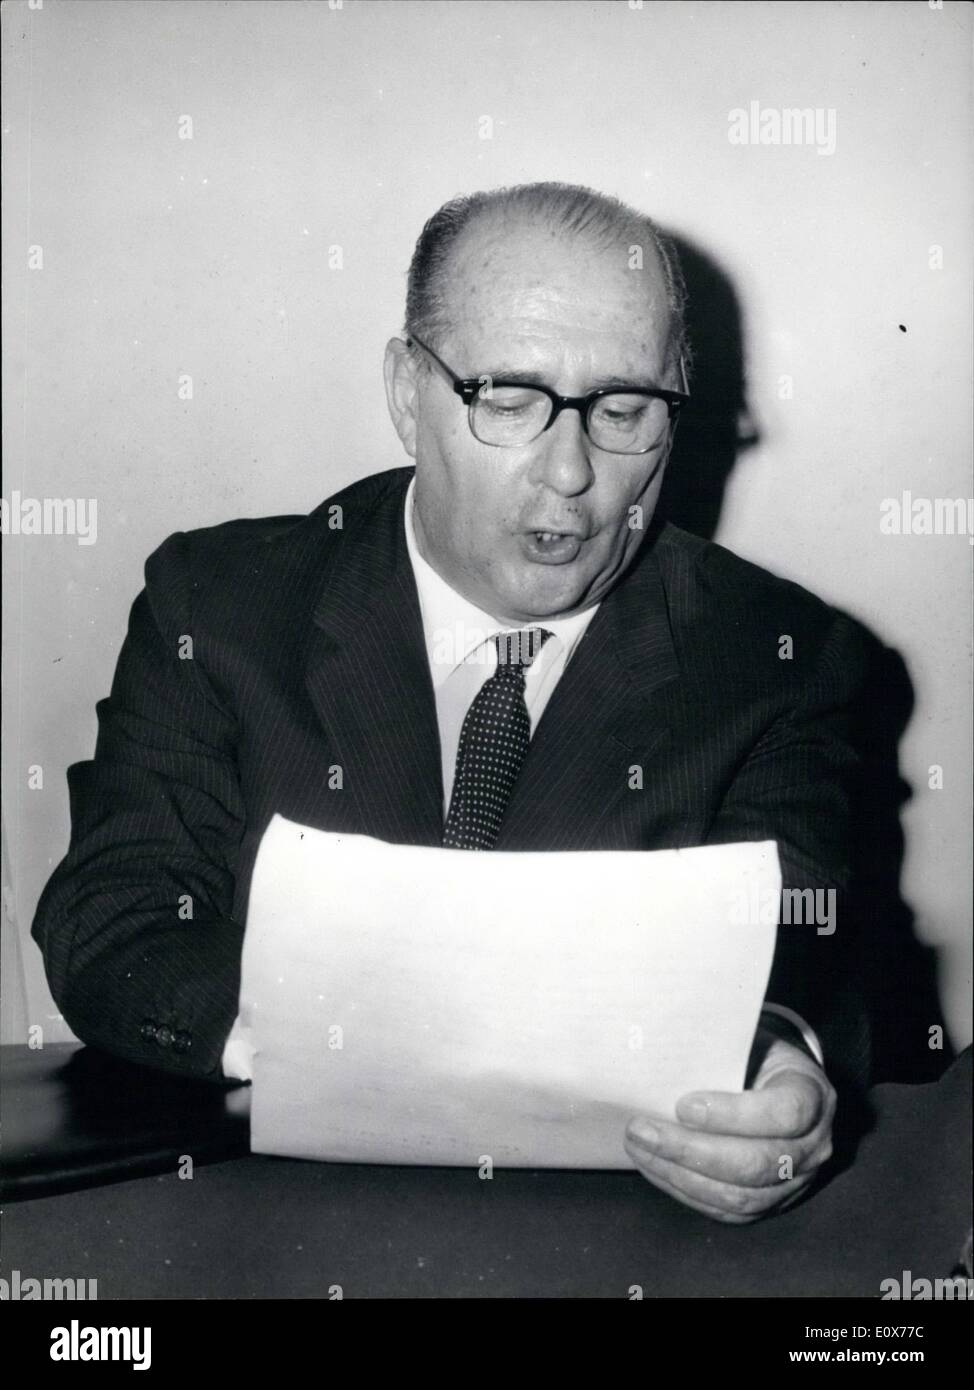 Jul. 07, 1965 - In spite of the sultry weather, ''Cinecitta'' works. The famous italian director Roberto Rossellini, the ''father'' of neo-realism, hold a press conference, today, at the Foreign Press Association in Roma. Photo shows Robert Rossellini. Stock Photo